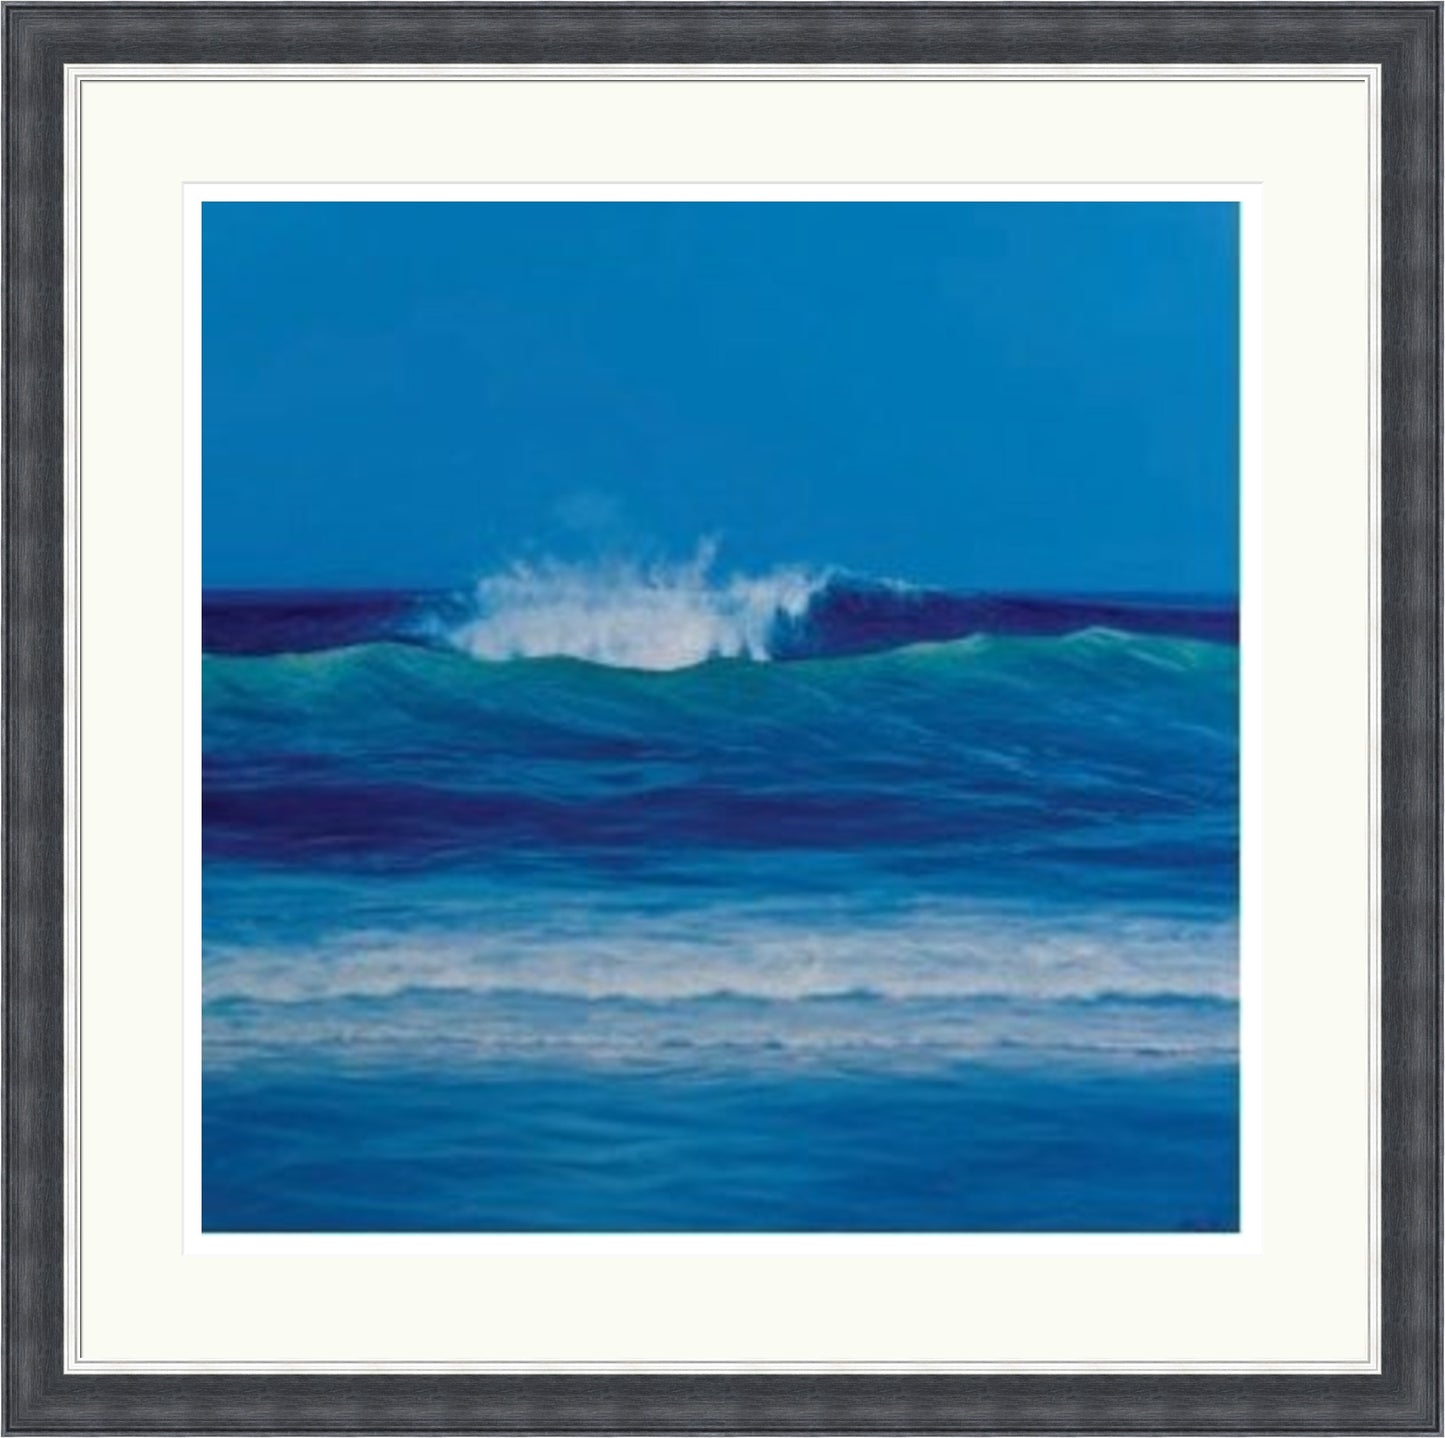 High Waves (Limited Edition) by Derek Hare